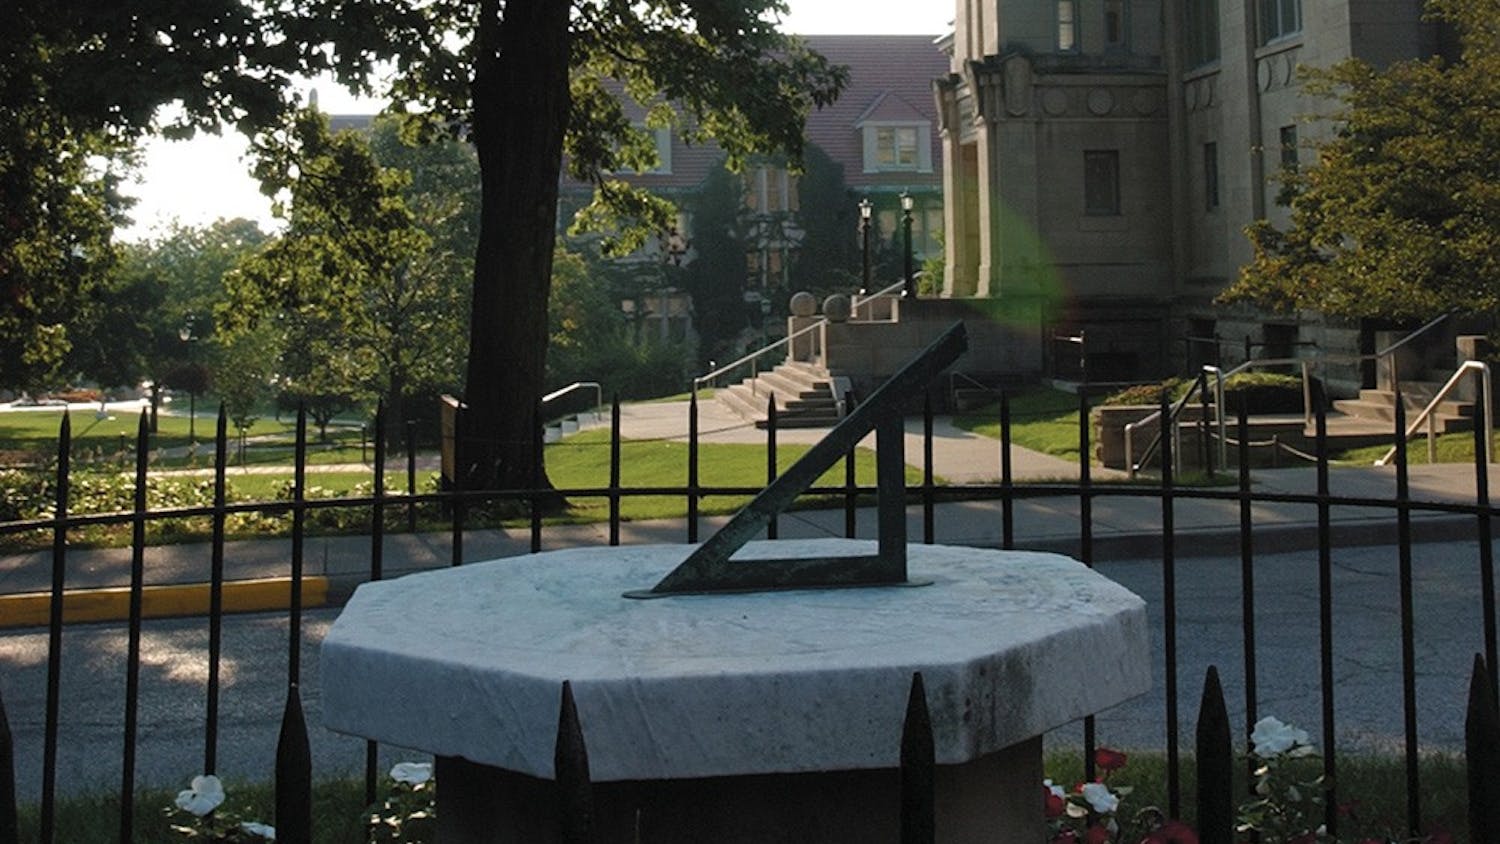 The sundial can be found beside Maxwell Hall. It was first displayed in 1868 and was moved to Dunn's Woods in 1896. &nbsp;&nbsp;&nbsp;&nbsp;&nbsp;&nbsp;&nbsp;&nbsp;&nbsp;&nbsp;&nbsp;&nbsp;&nbsp;&nbsp;&nbsp;&nbsp;&nbsp;&nbsp;&nbsp;&nbsp;&nbsp;&nbsp;&nbsp;&nbsp;&nbsp;&nbsp;&nbsp;&nbsp;&nbsp;